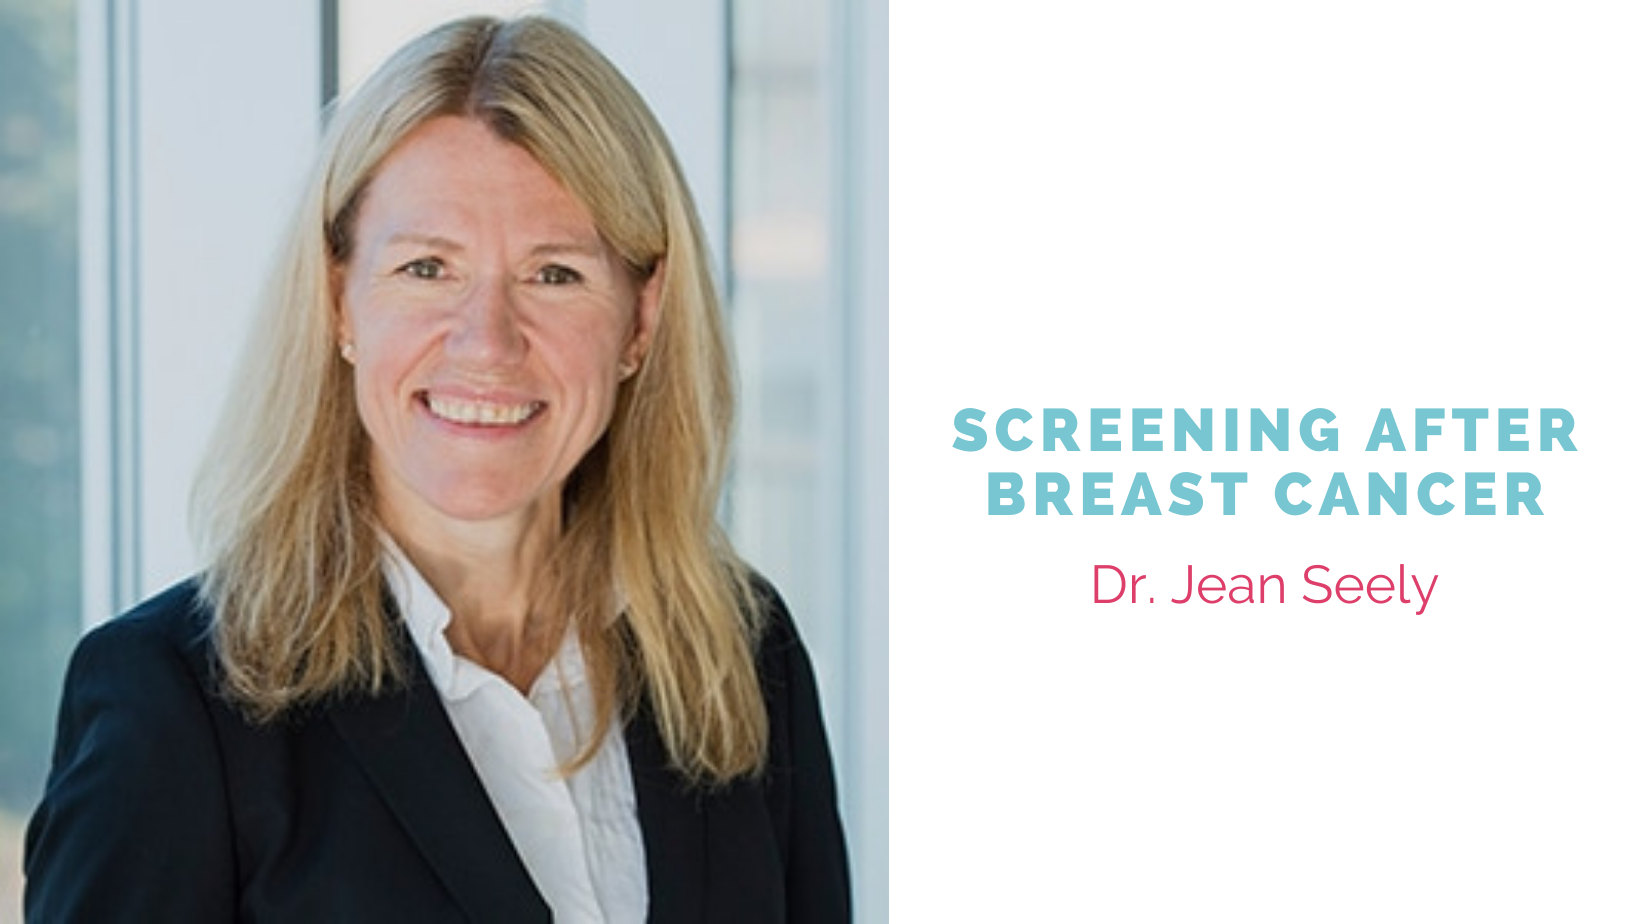 Screening After Breast Cancer with Dr. Jean Seely